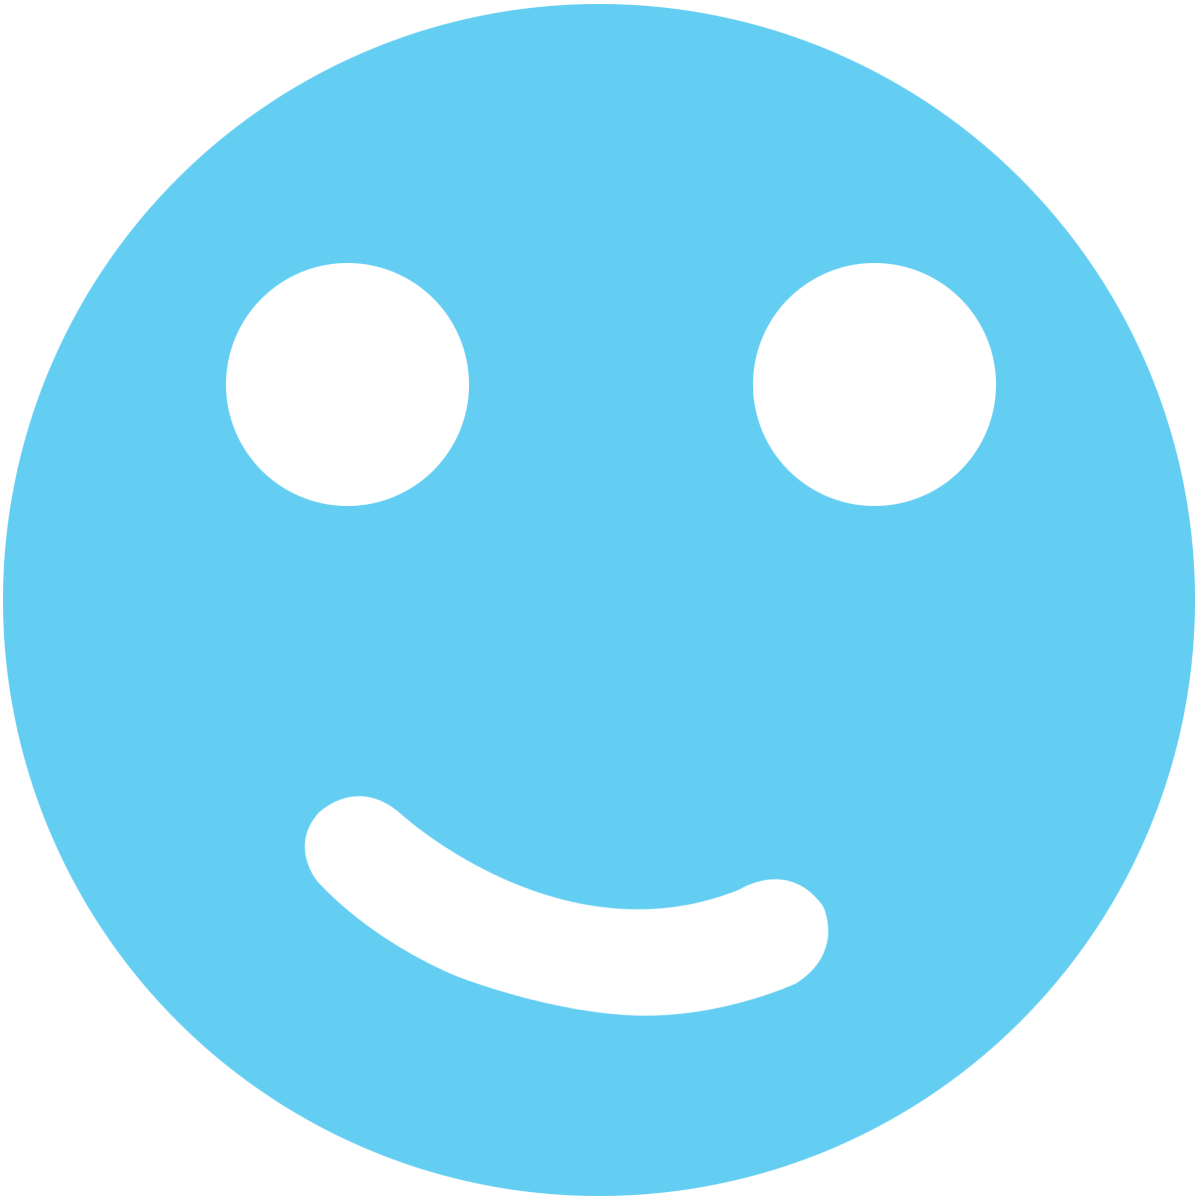 smiley-blue